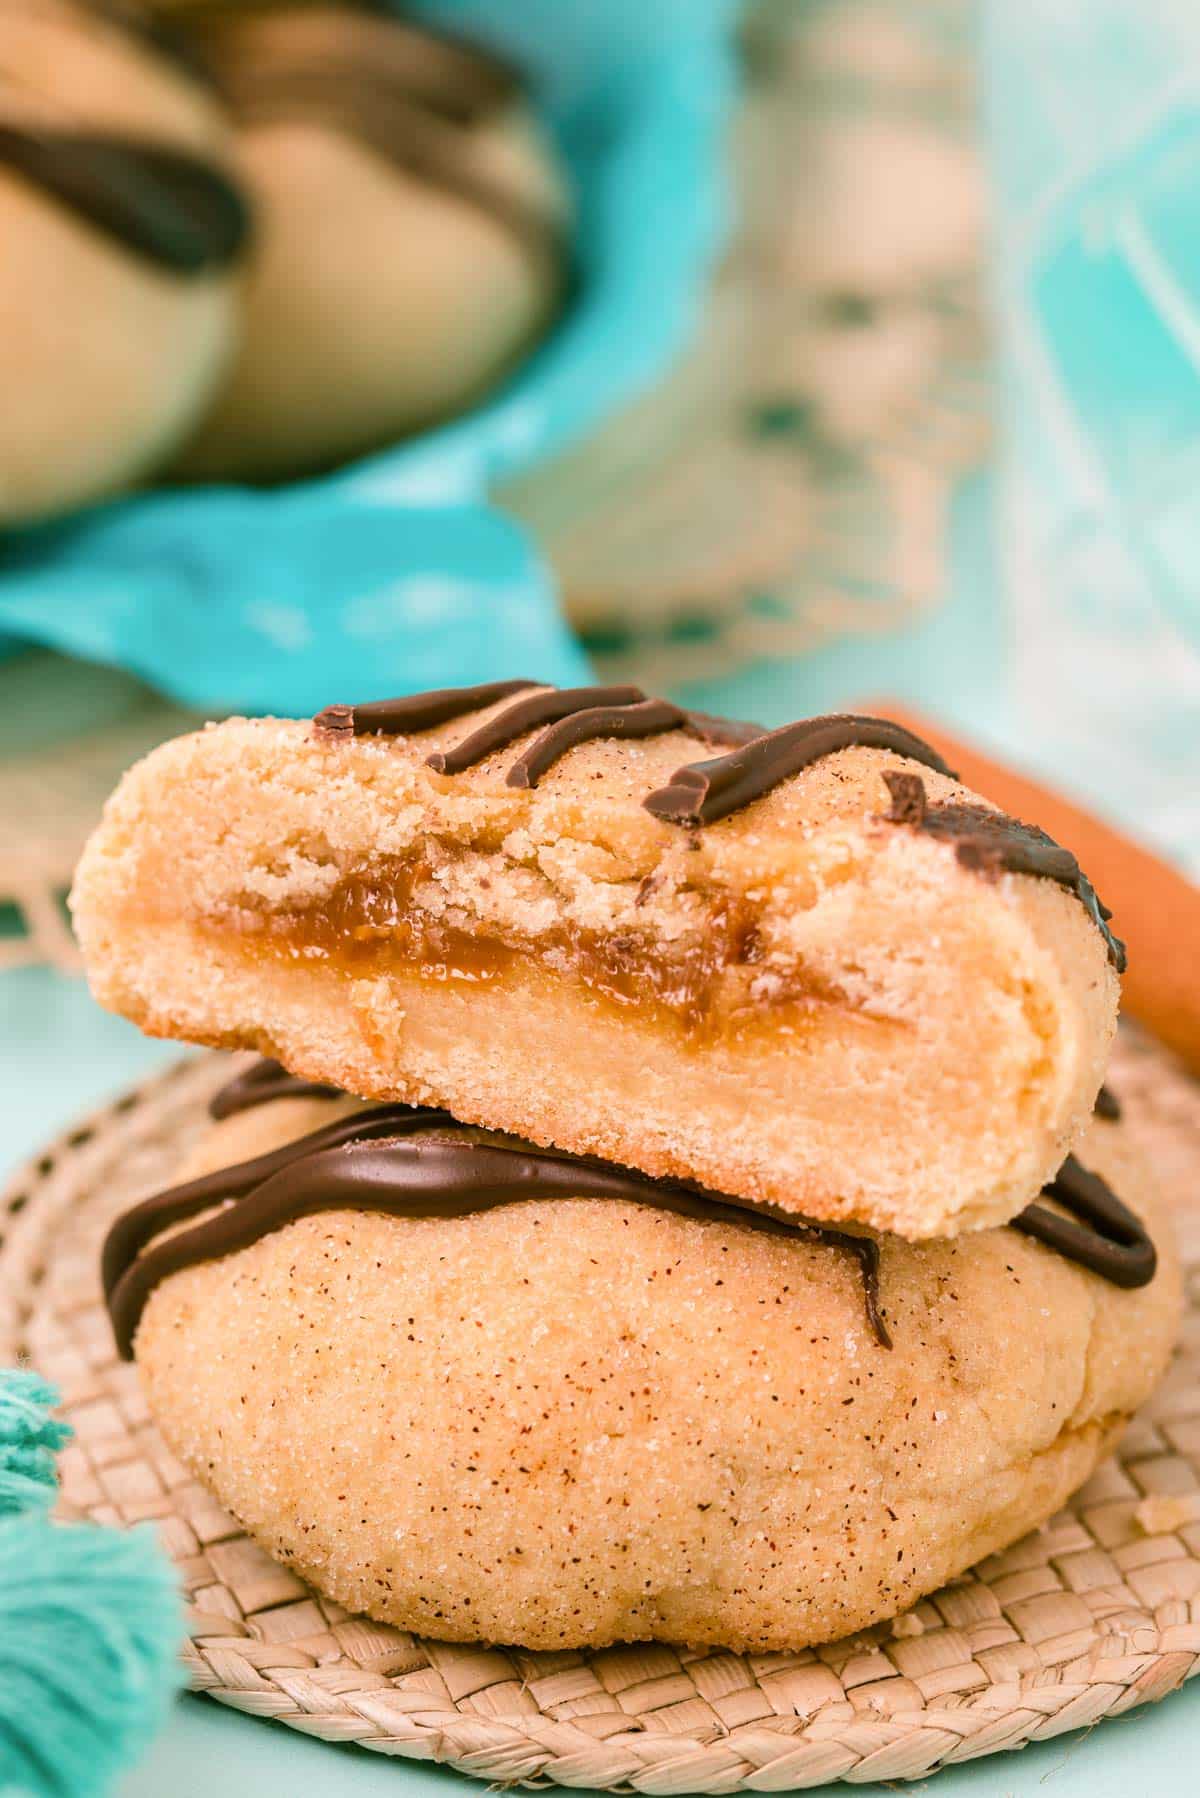 Two cookies stacked, one sliced open revealing the center stuffed with dulce de leche.